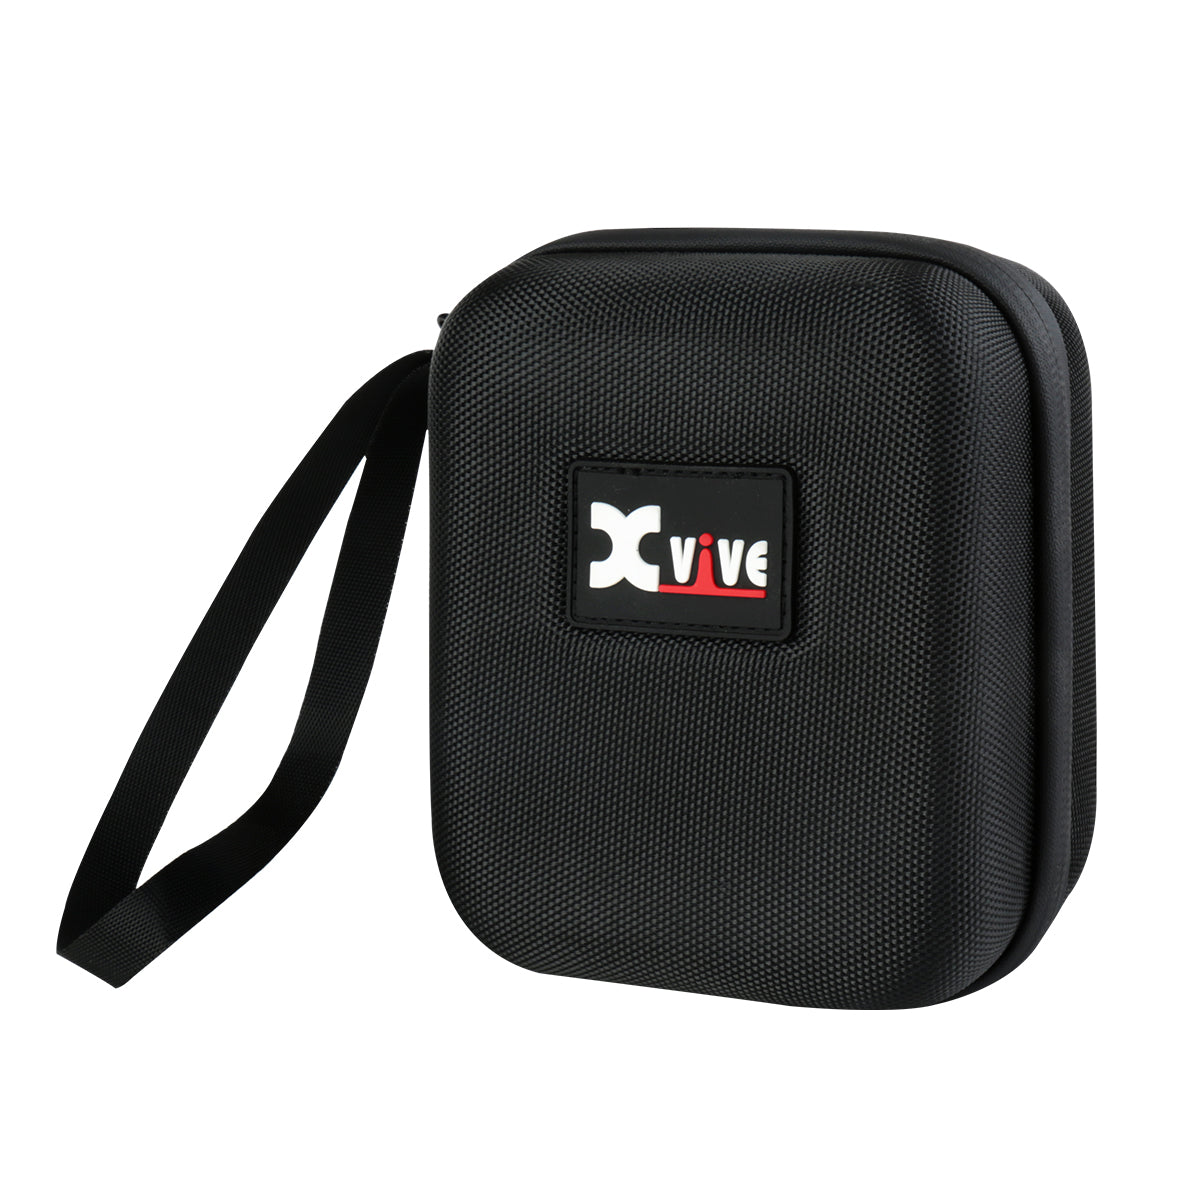 Xvive Travel Case for U2 Guitar Wireless System